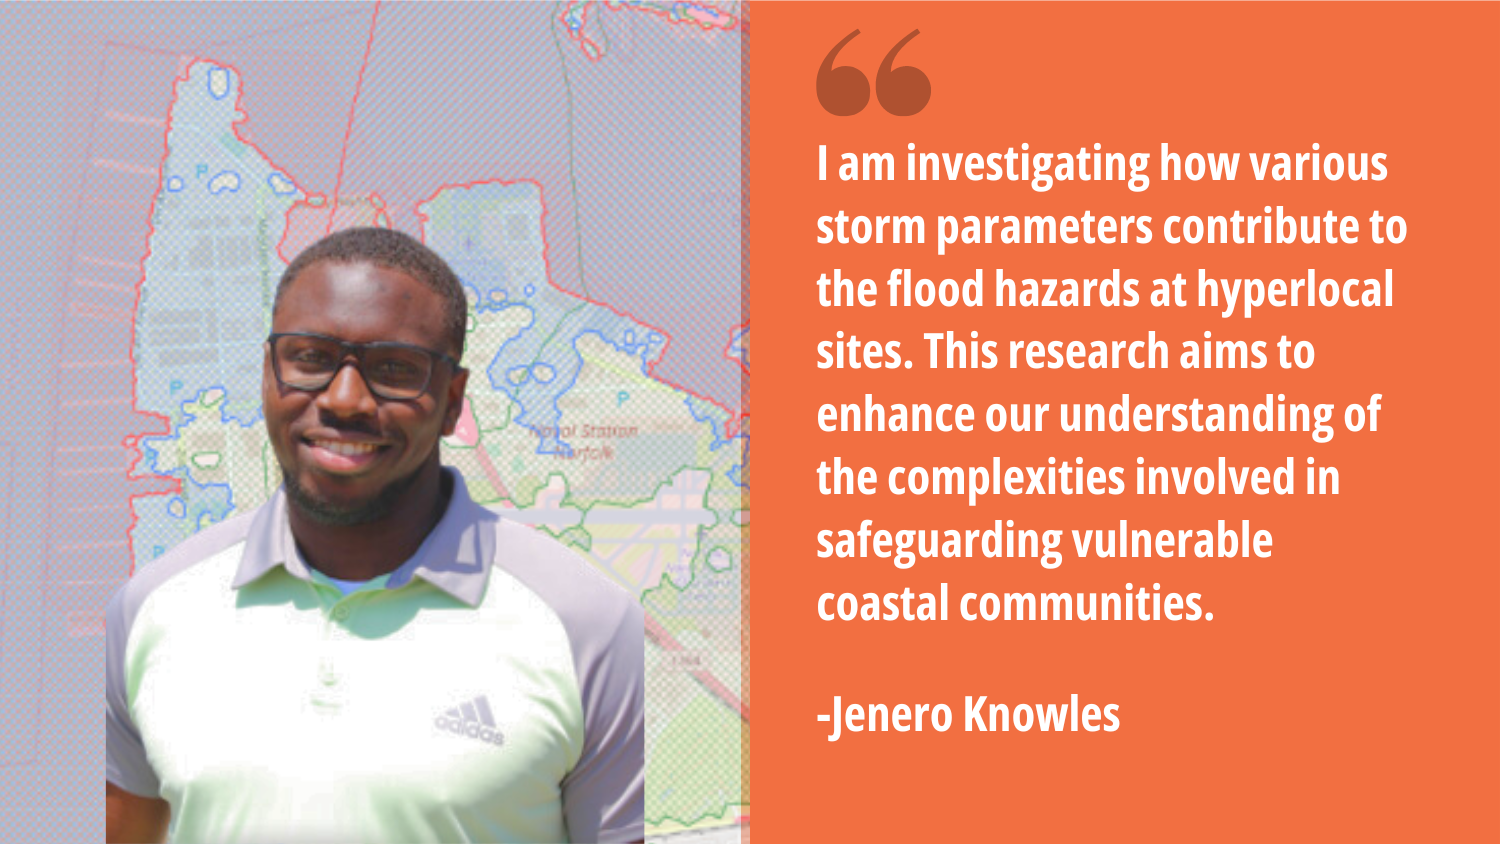 Jenero Knowles with a quote from his researcher spotlight.